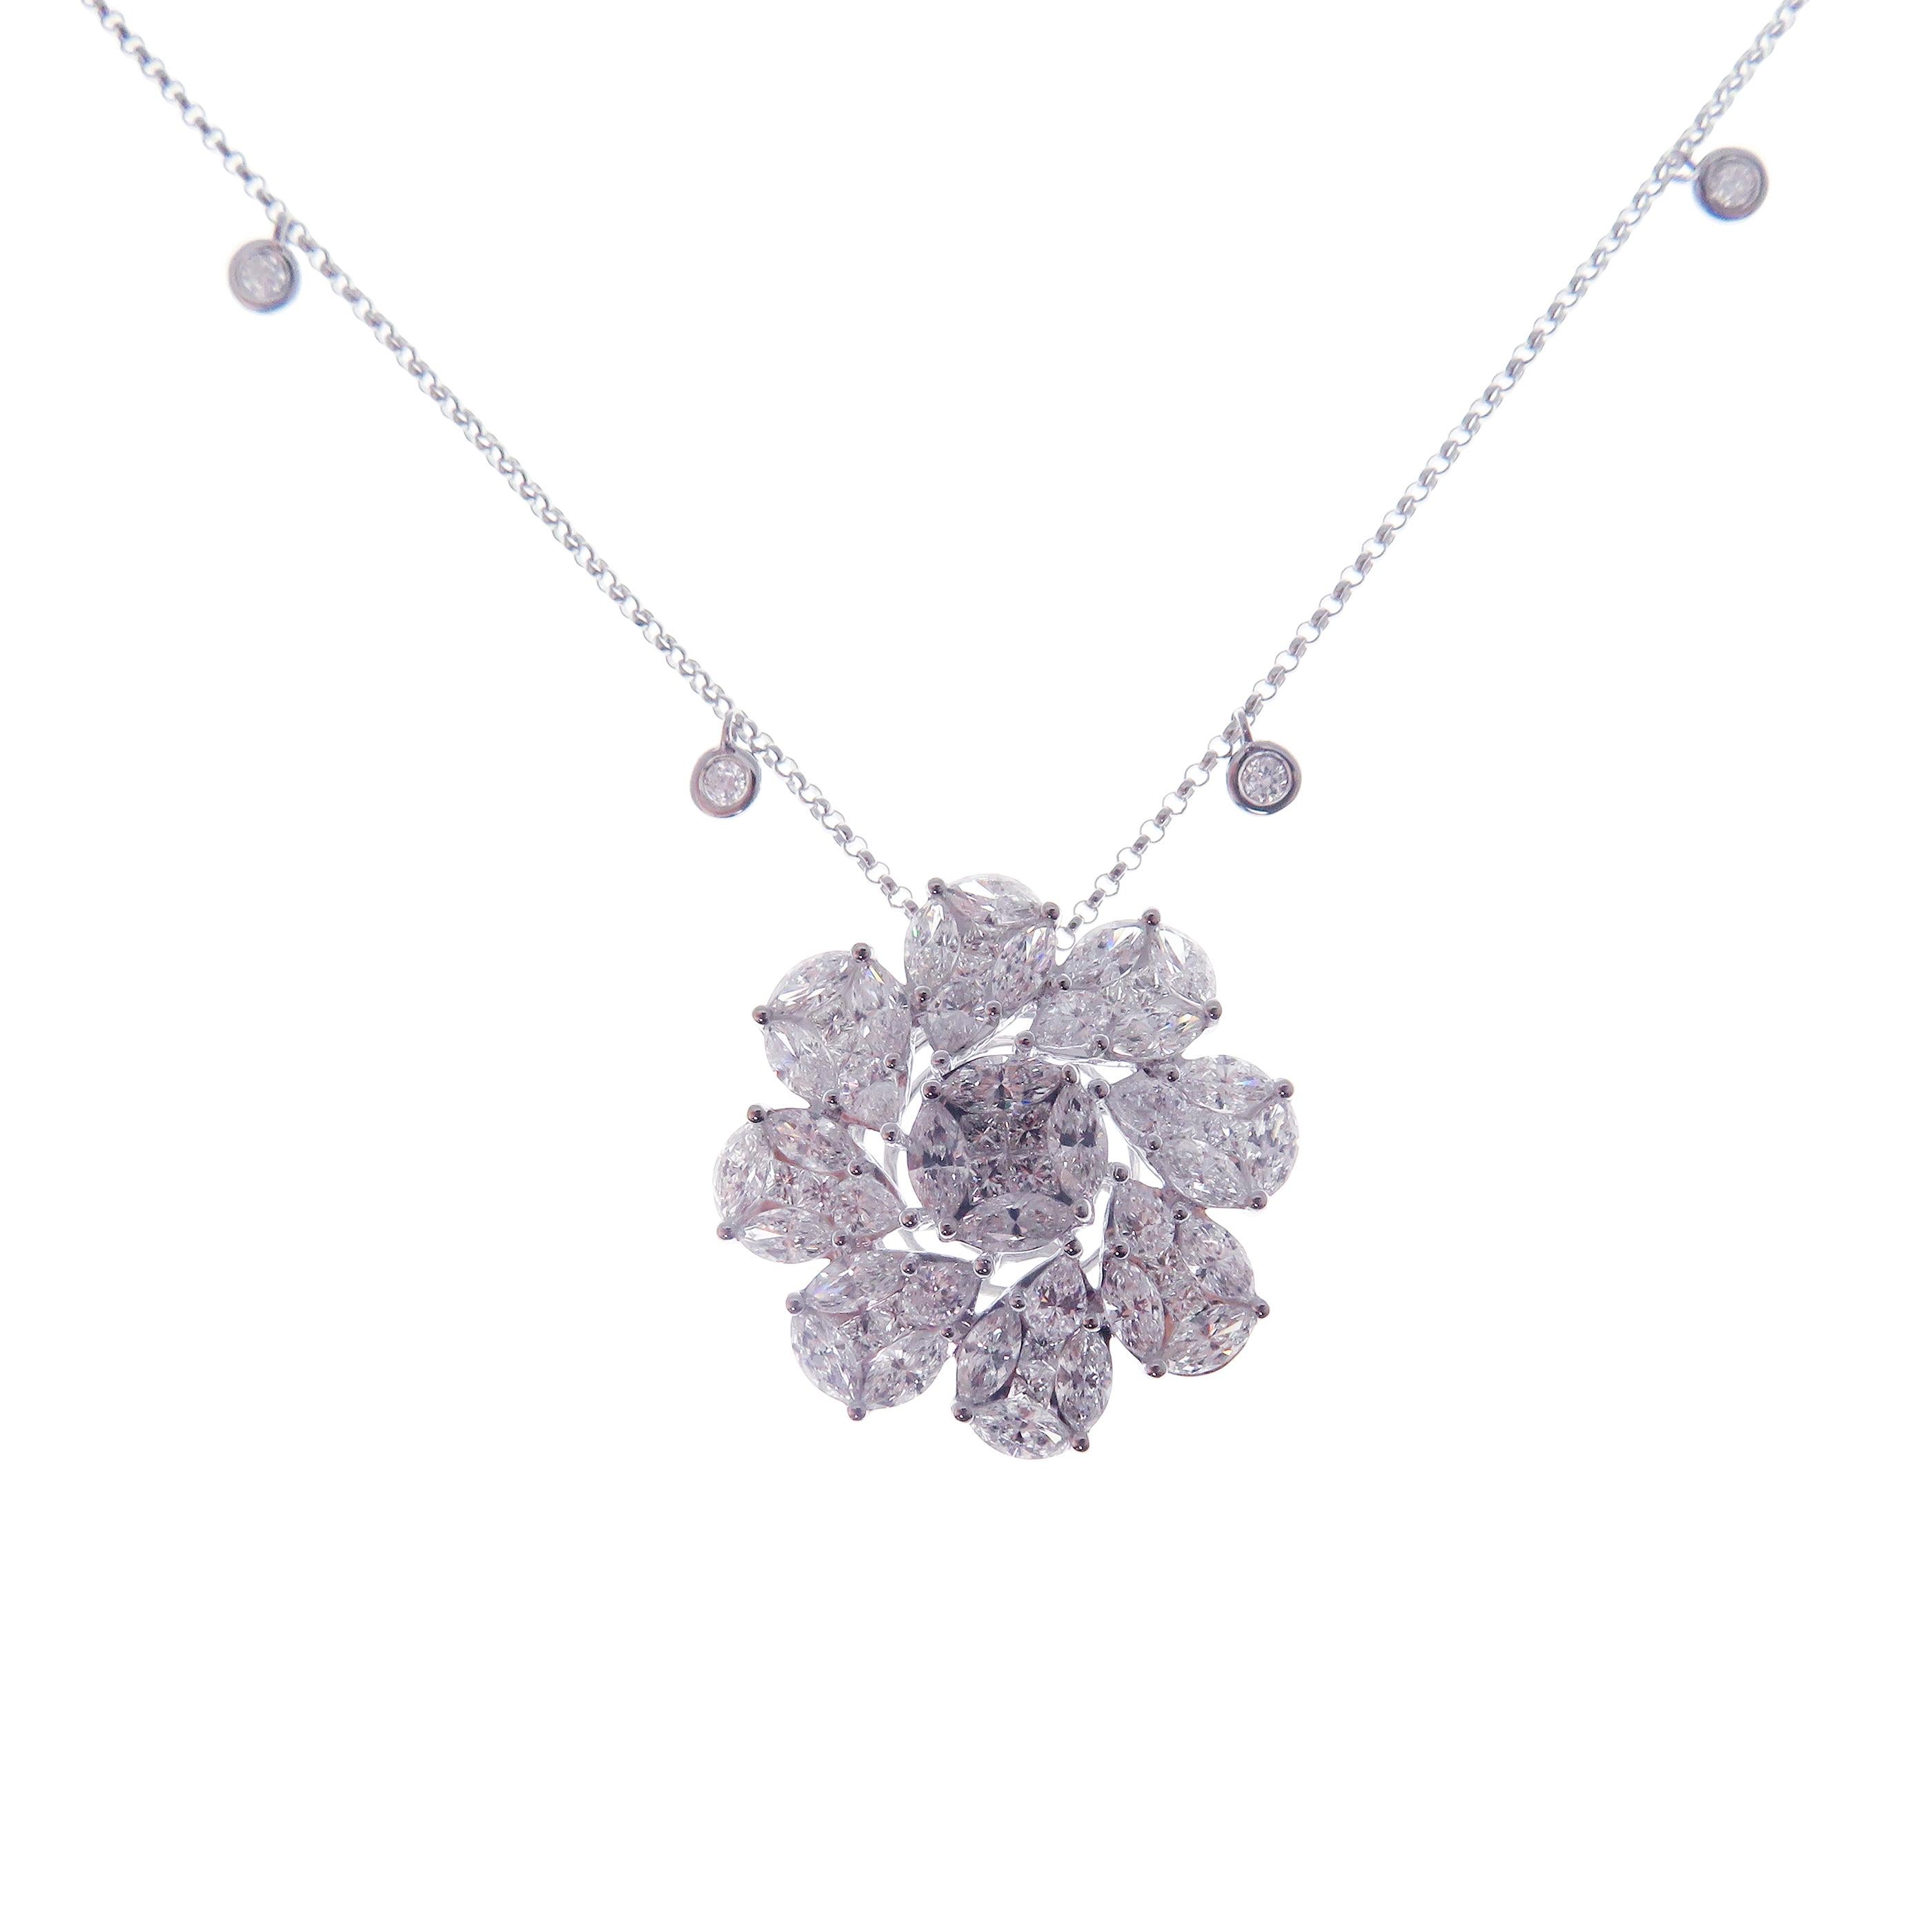 This gorgeous flower diamond DBY necklace is crafted in 18-karat white gold, weighing approximately 3.65 total carats of SI-V Quality white diamonds.

Necklace is 16